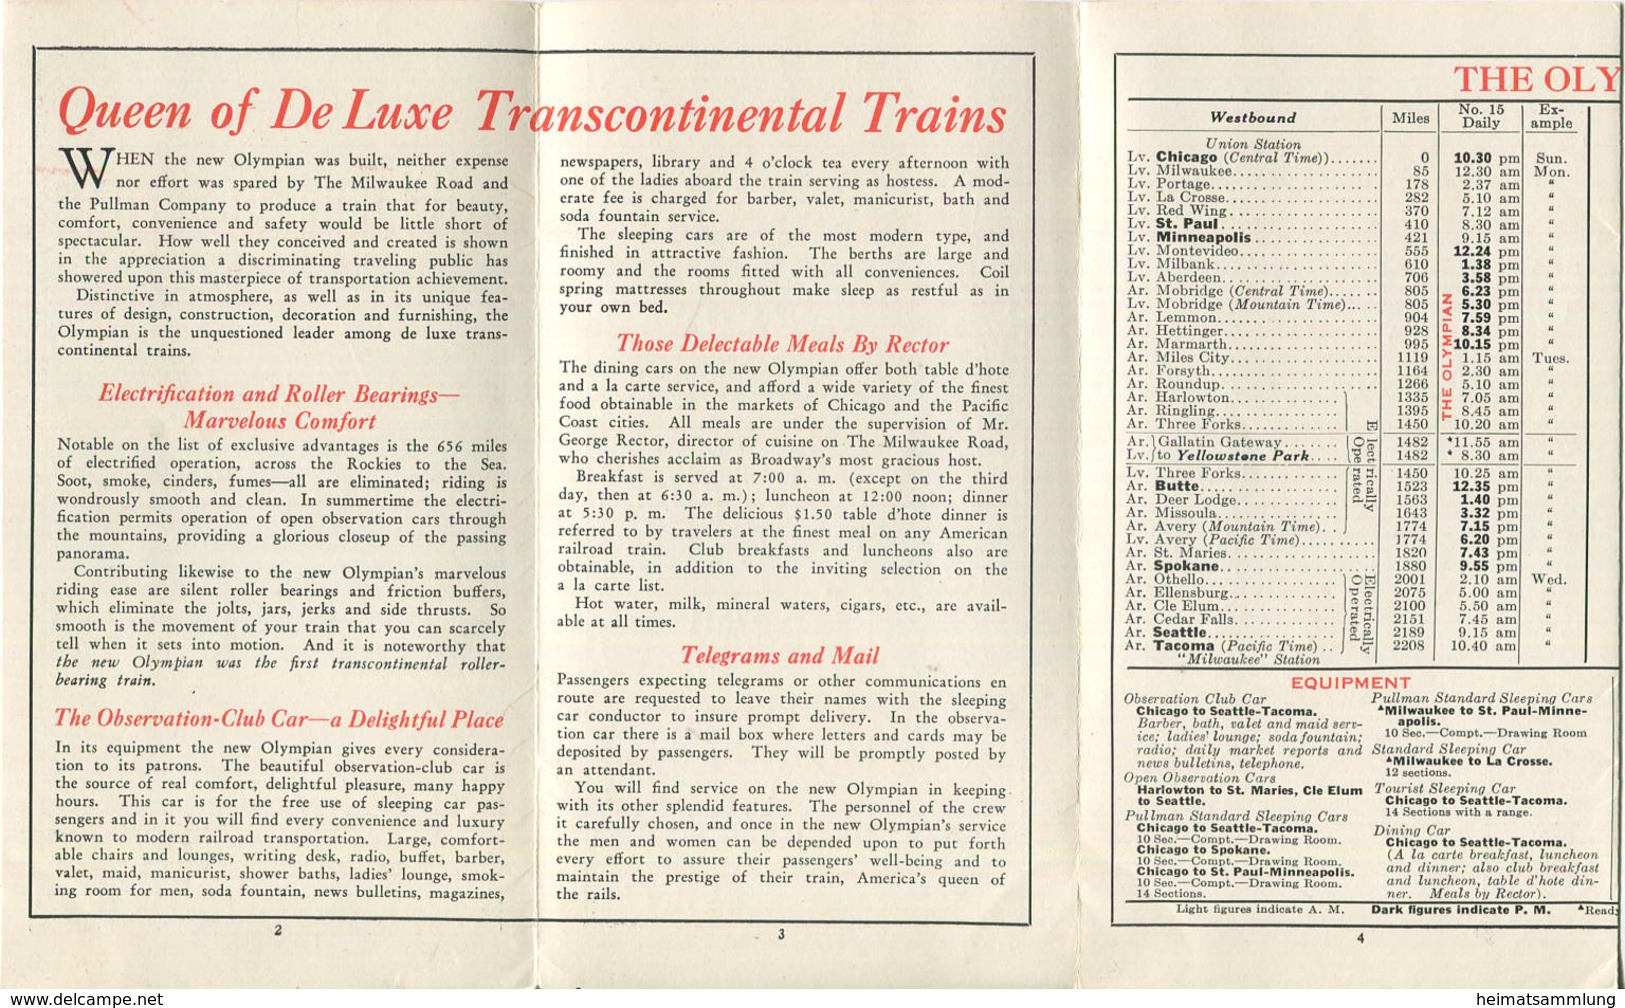 The Olympian 1930 - Queen Of De Luxe Transcontinental Trains - Fahrplan Between Cjicago And Seattle-Tacoma - Wereld